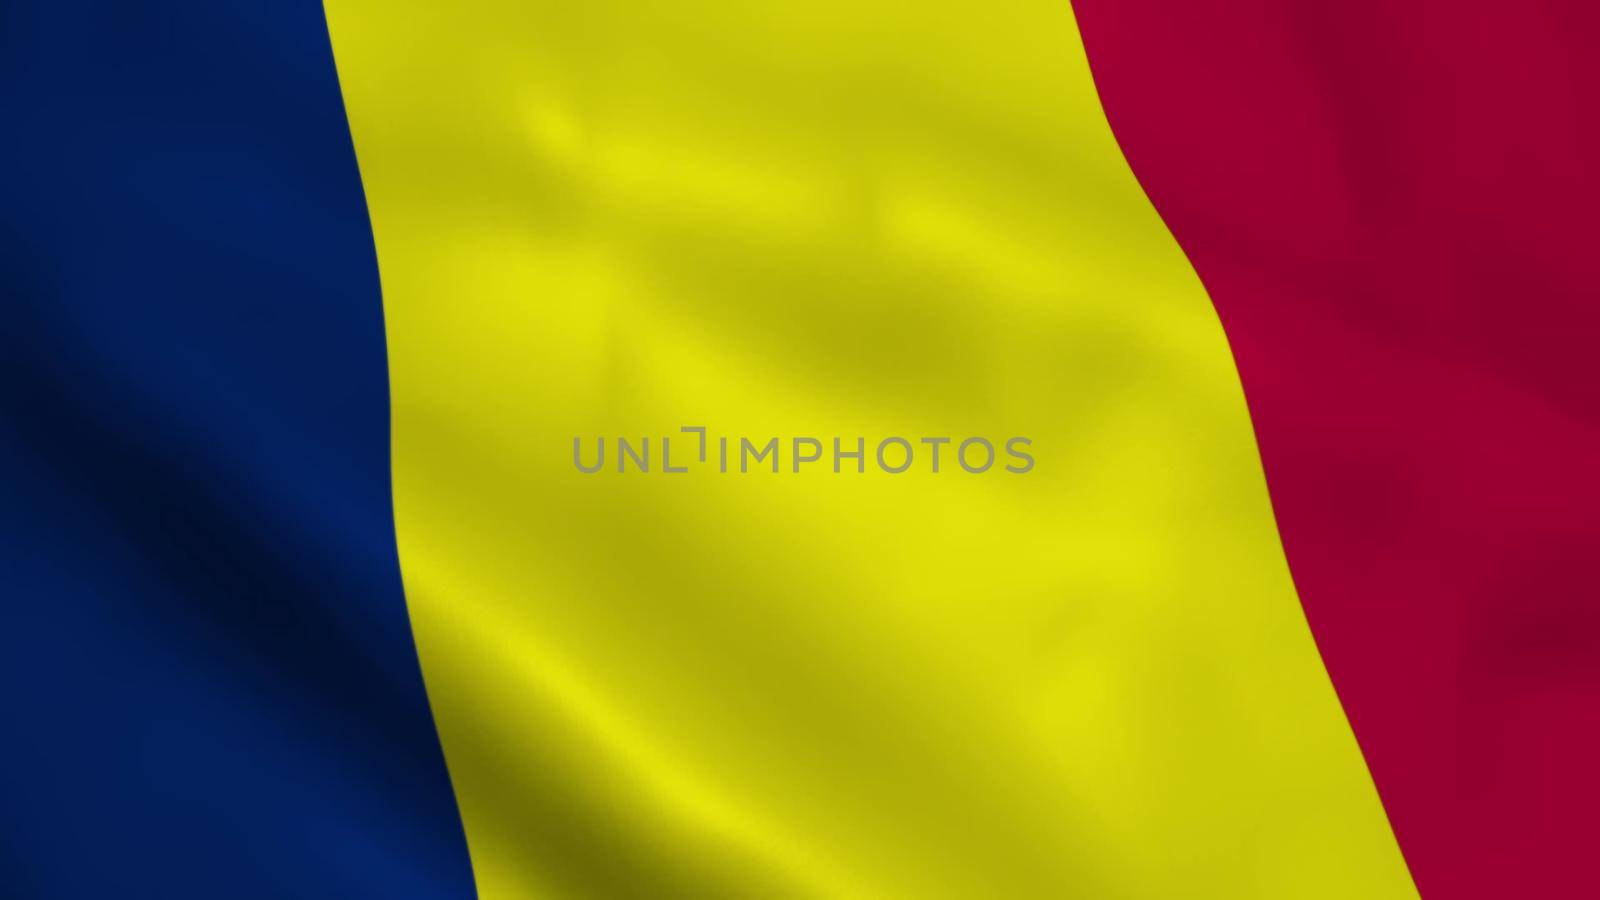 Realistic Chad flag 3D rendering by designprojects